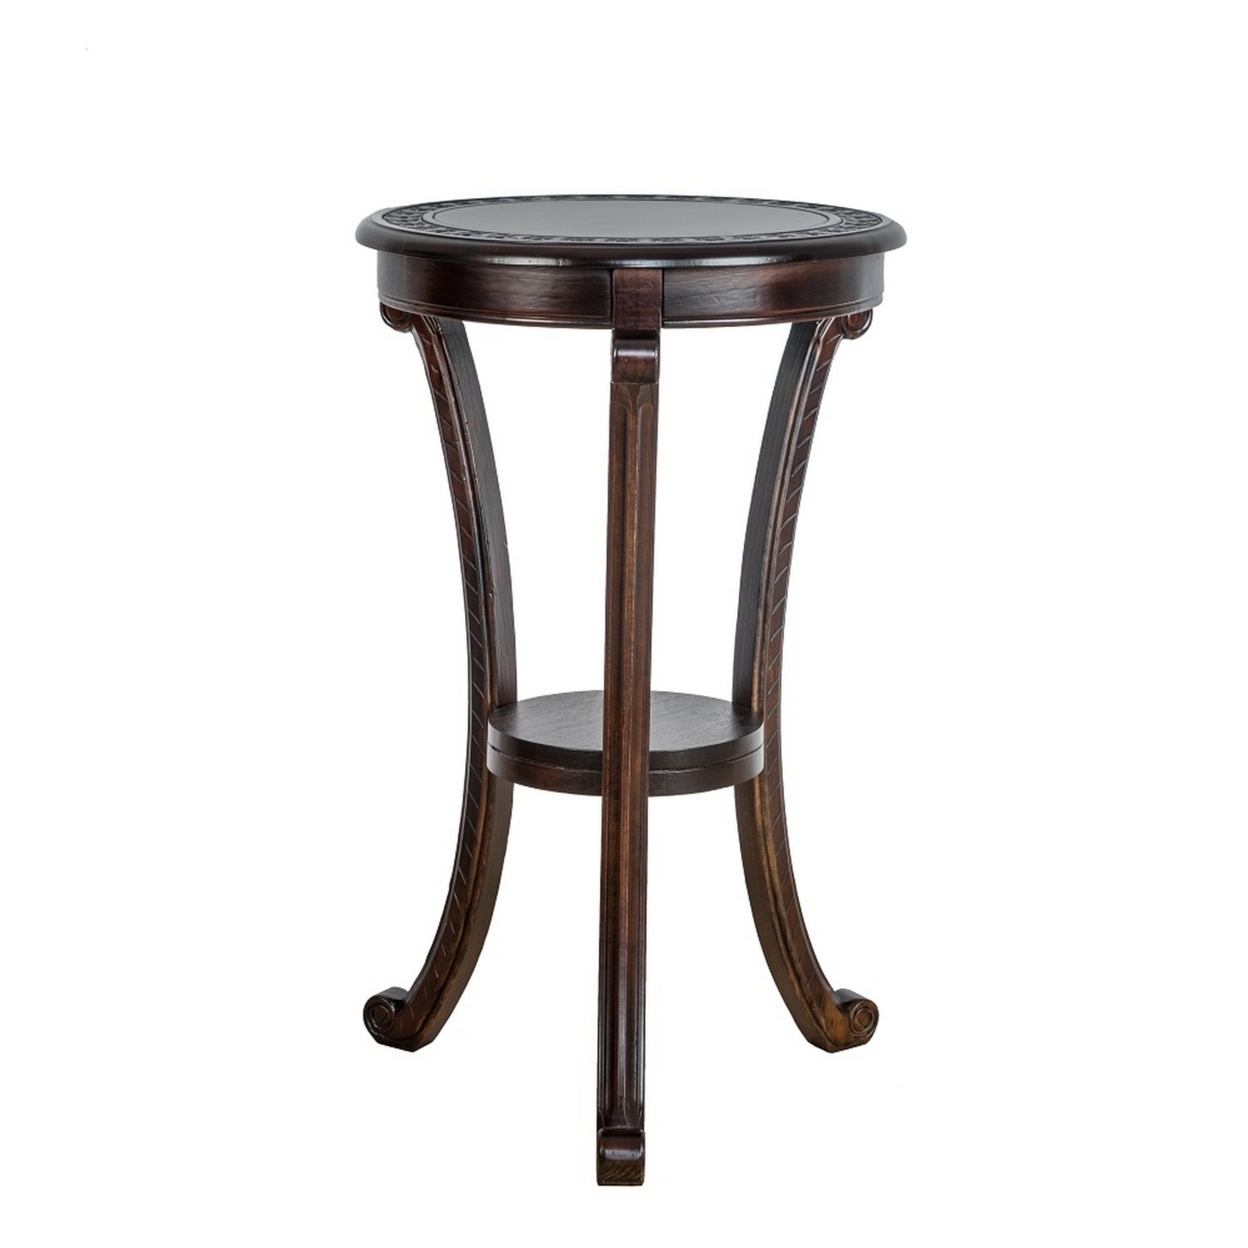 Pedestal With 1 Shelf And Intricate Carved Cabriole Legs, Brown- Saltoro Sherpi